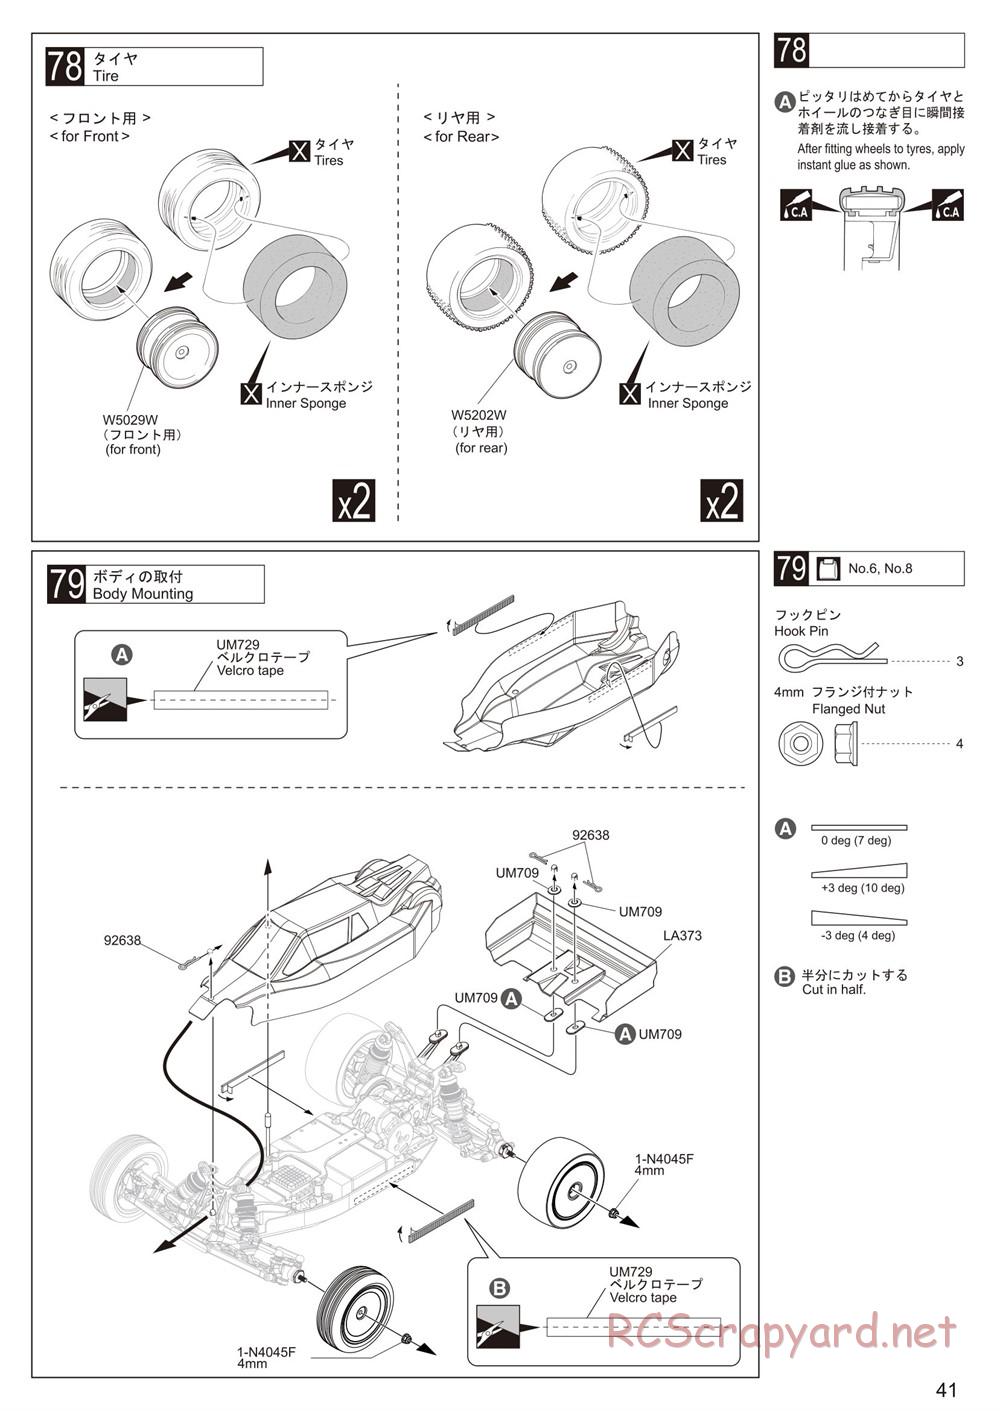 Kyosho - Ultima RB6.6 - Manual - Page 41